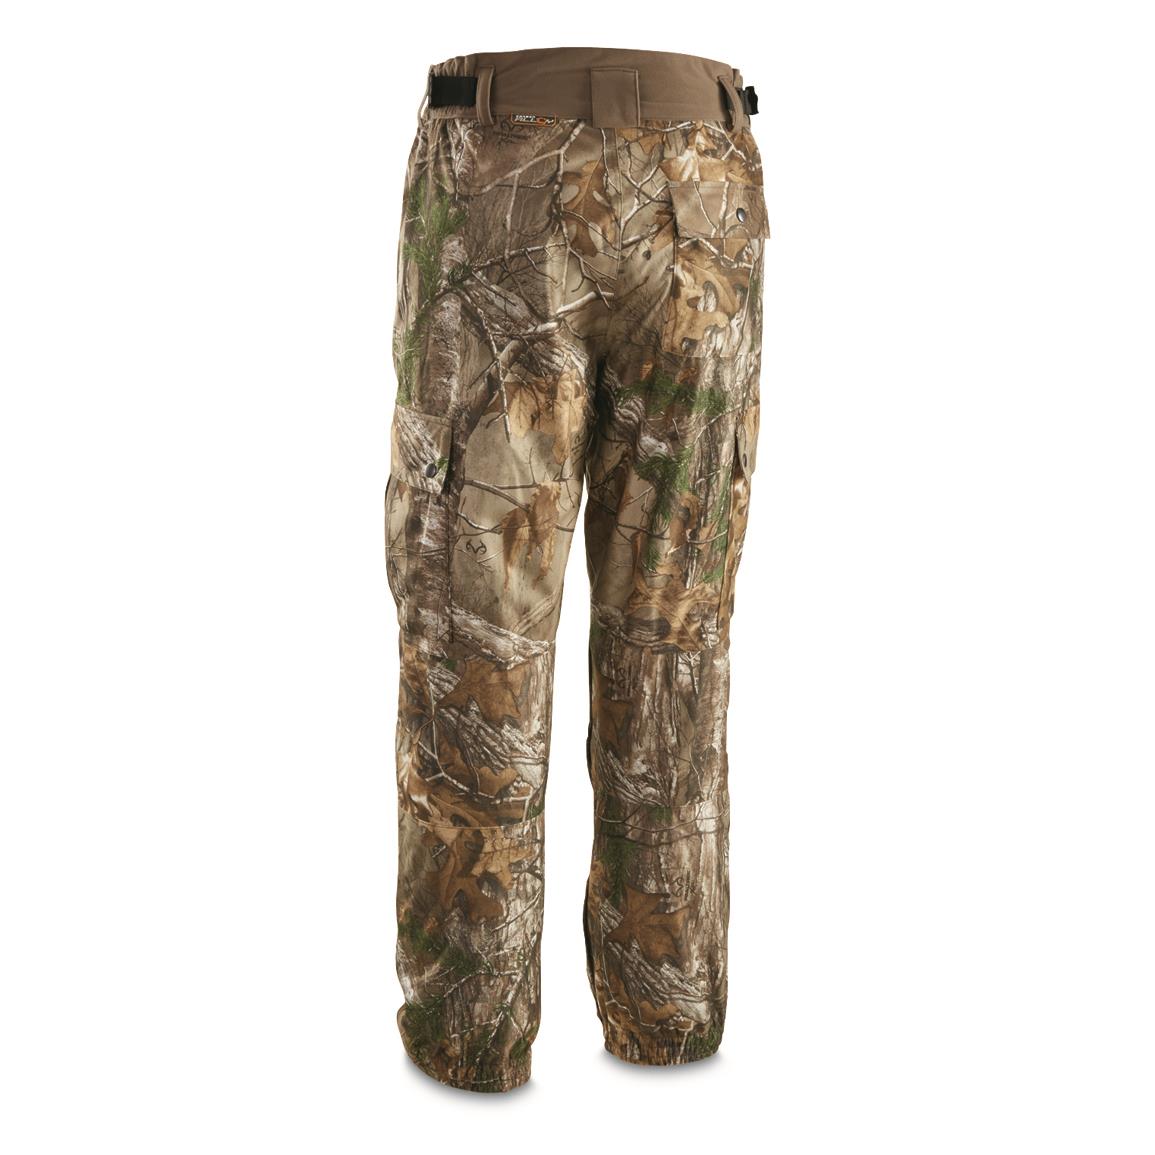 ScentLok Cold Blooded Waterproof Hunting Pants - 675944, Camo Pants at ...